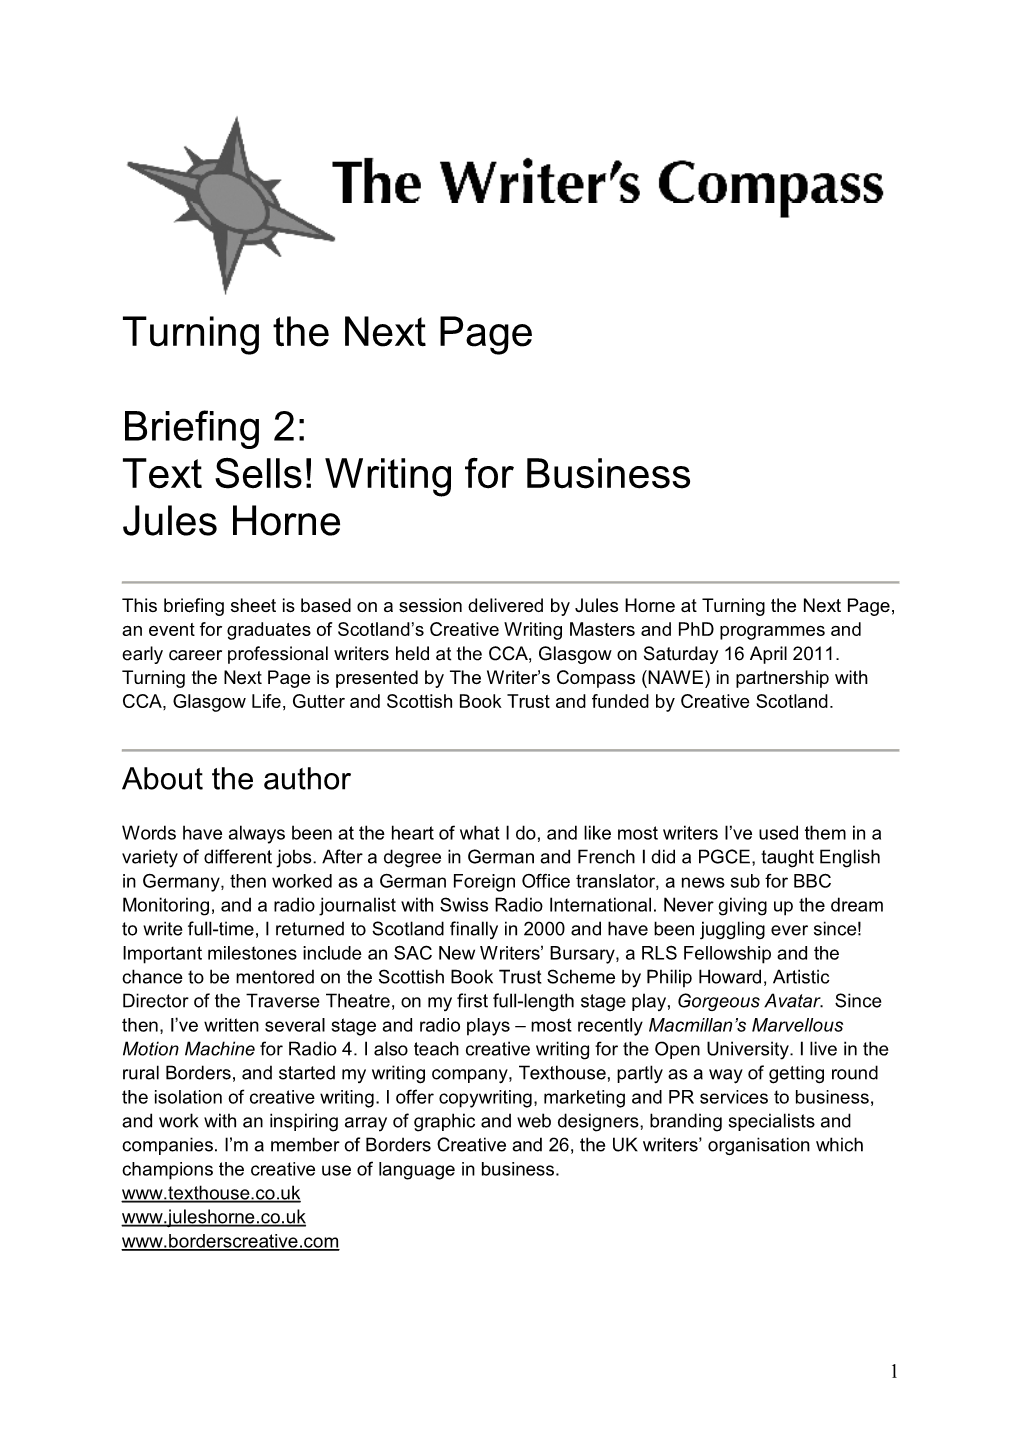 Text Sells! Writing for Business Jules Horne